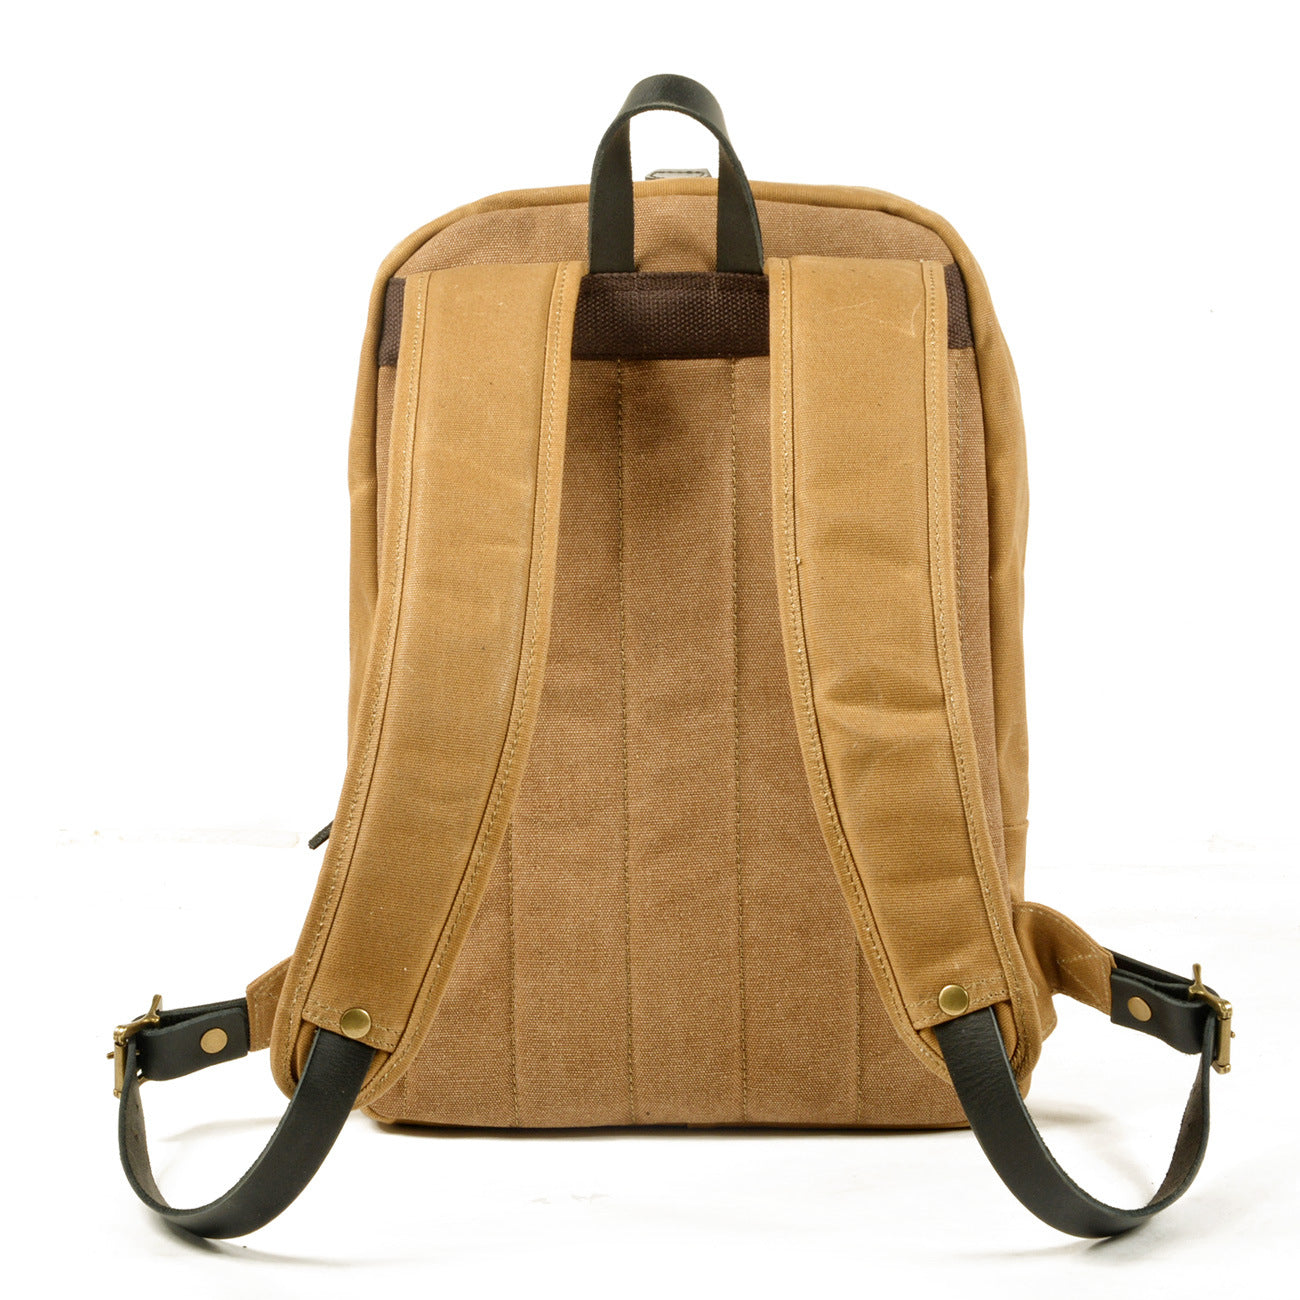 Vintage Water-resistant Canvas Hiking Backpack-Canvas Backpack-Black-Free Shipping Leatheretro